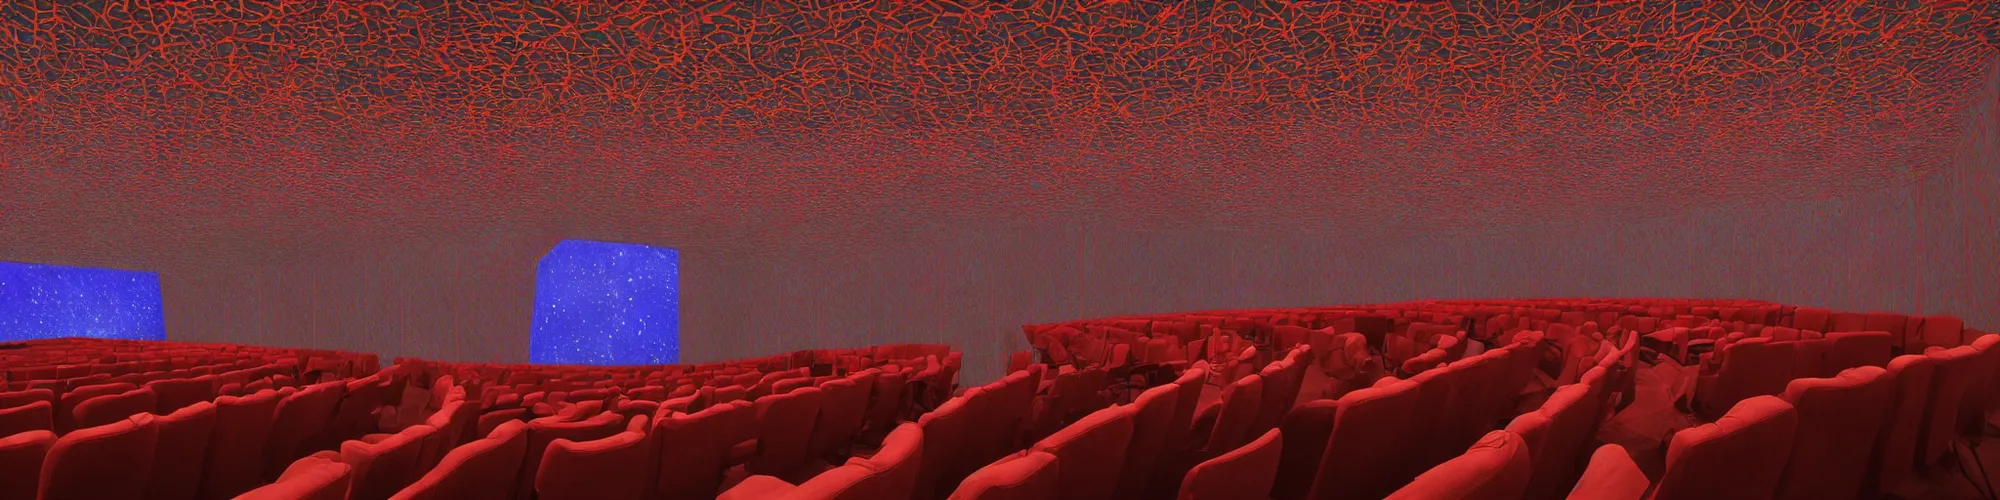 Image similar to Inside an astral theater with seats and screens